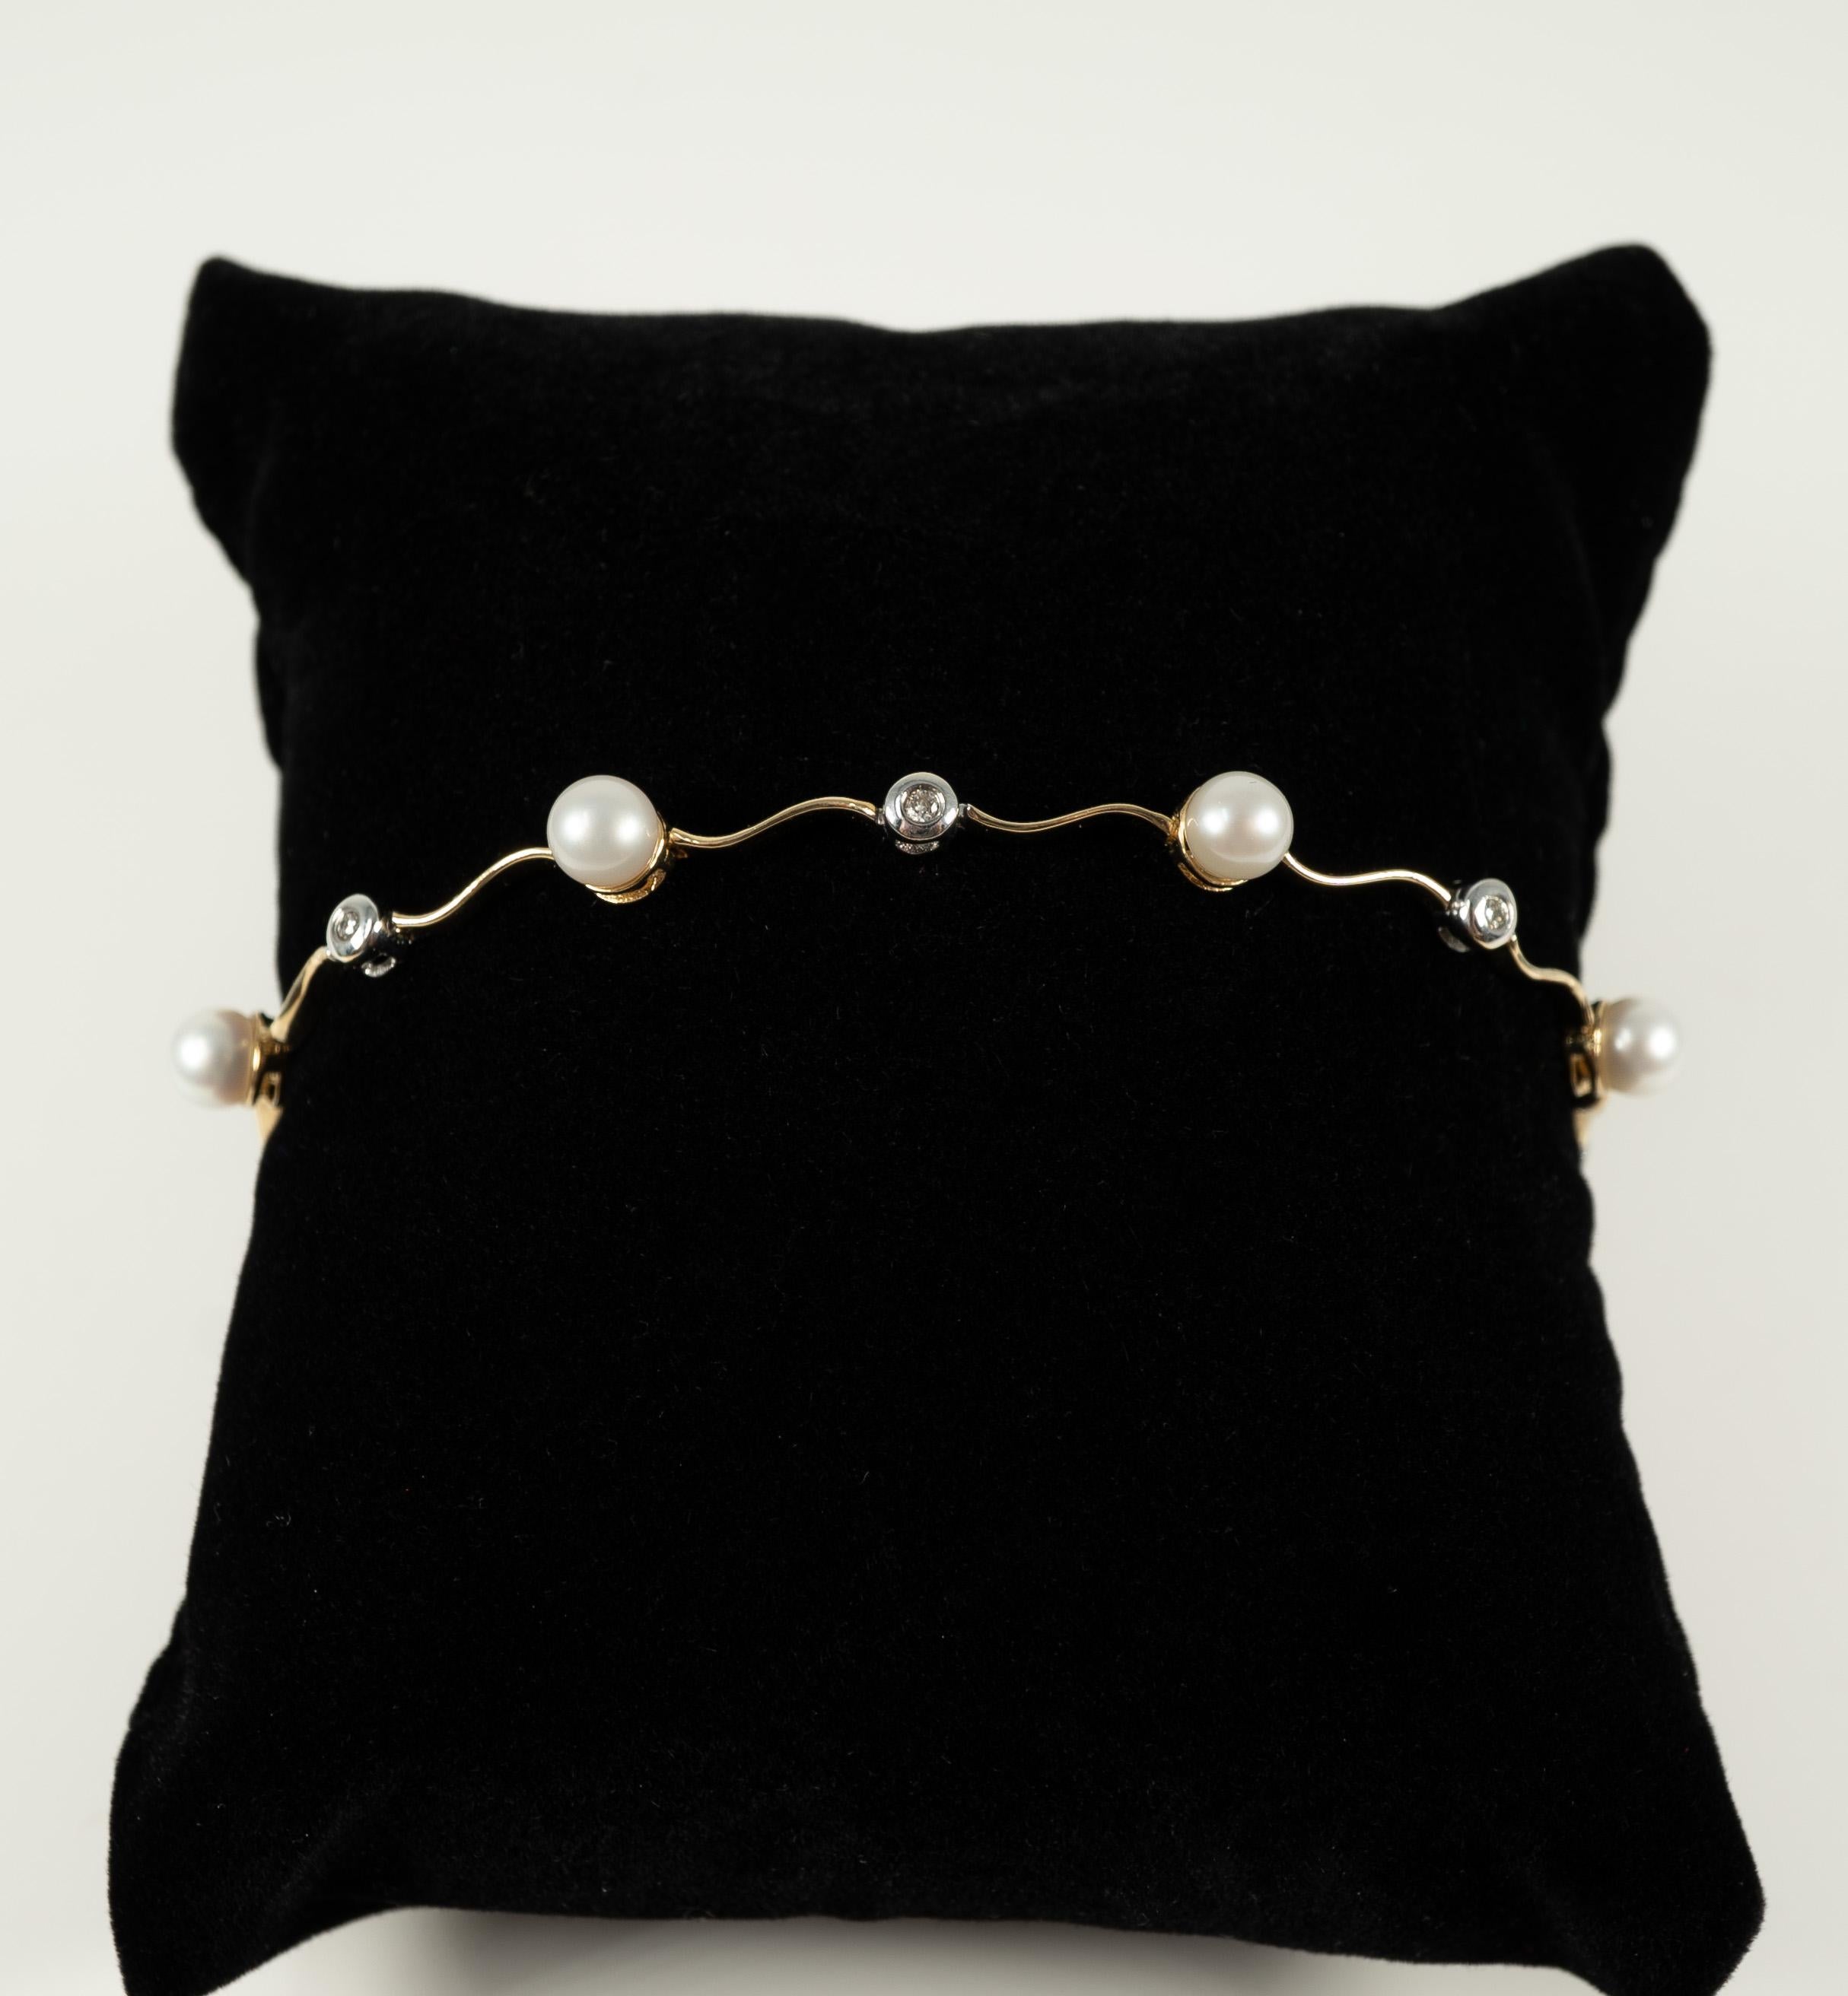 In 14 karat yellow and white gold, this lovely bracelet supports six round cultured pearls, measuring approximately 4.00 mm each, with accent diamonds